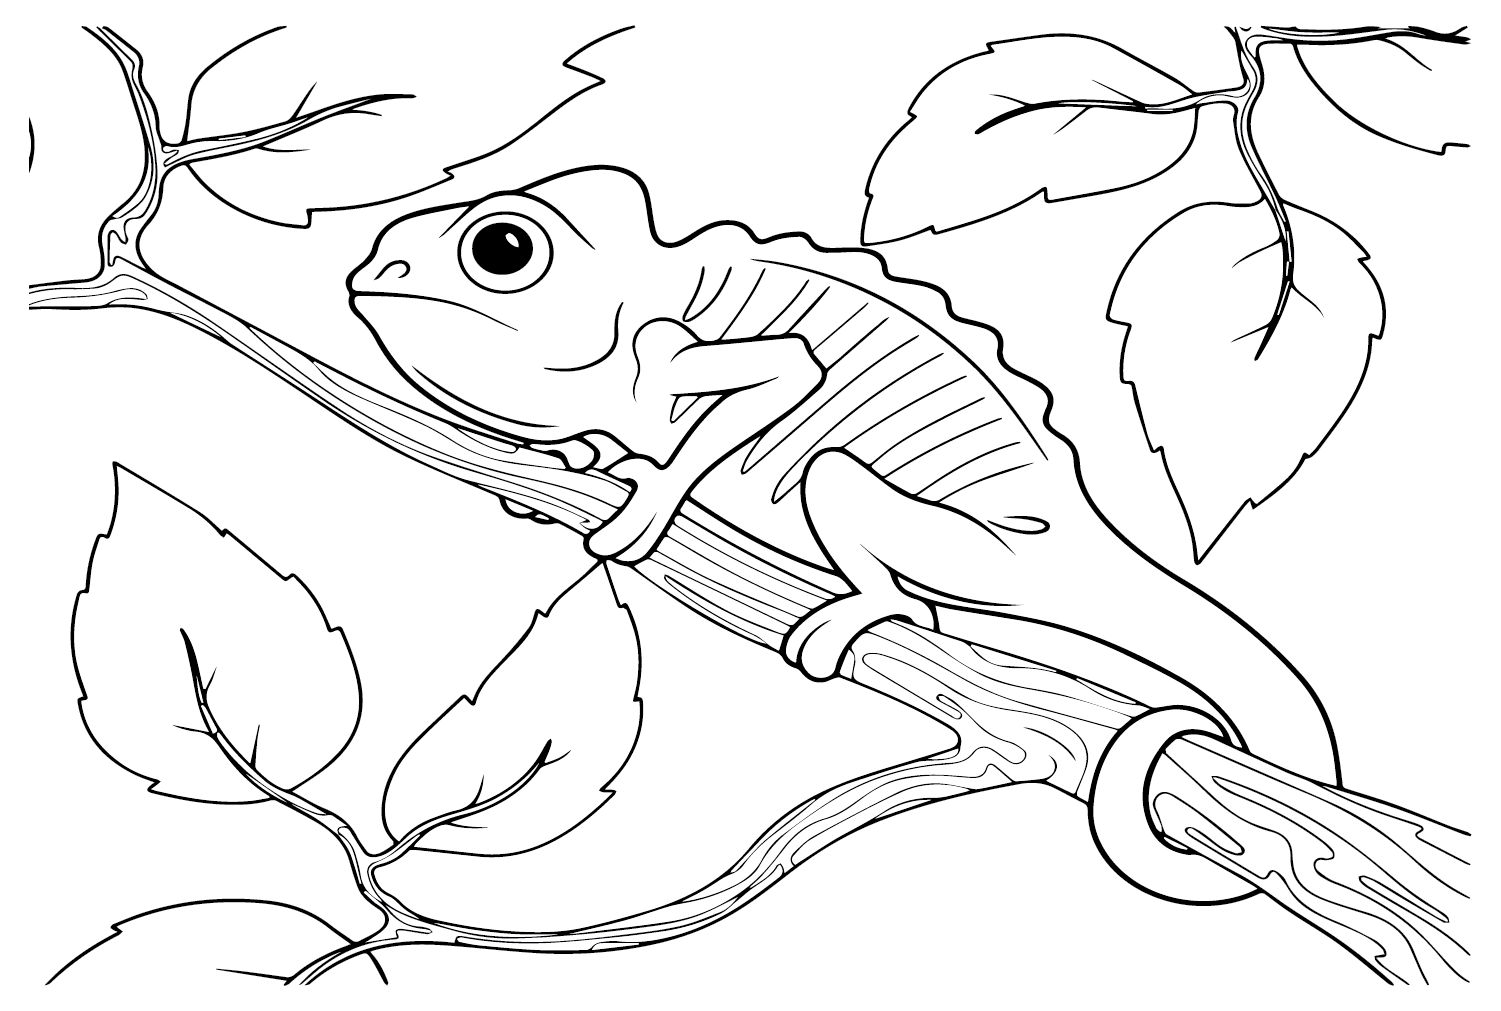 Printable Chameleon Coloring Page from Chameleon